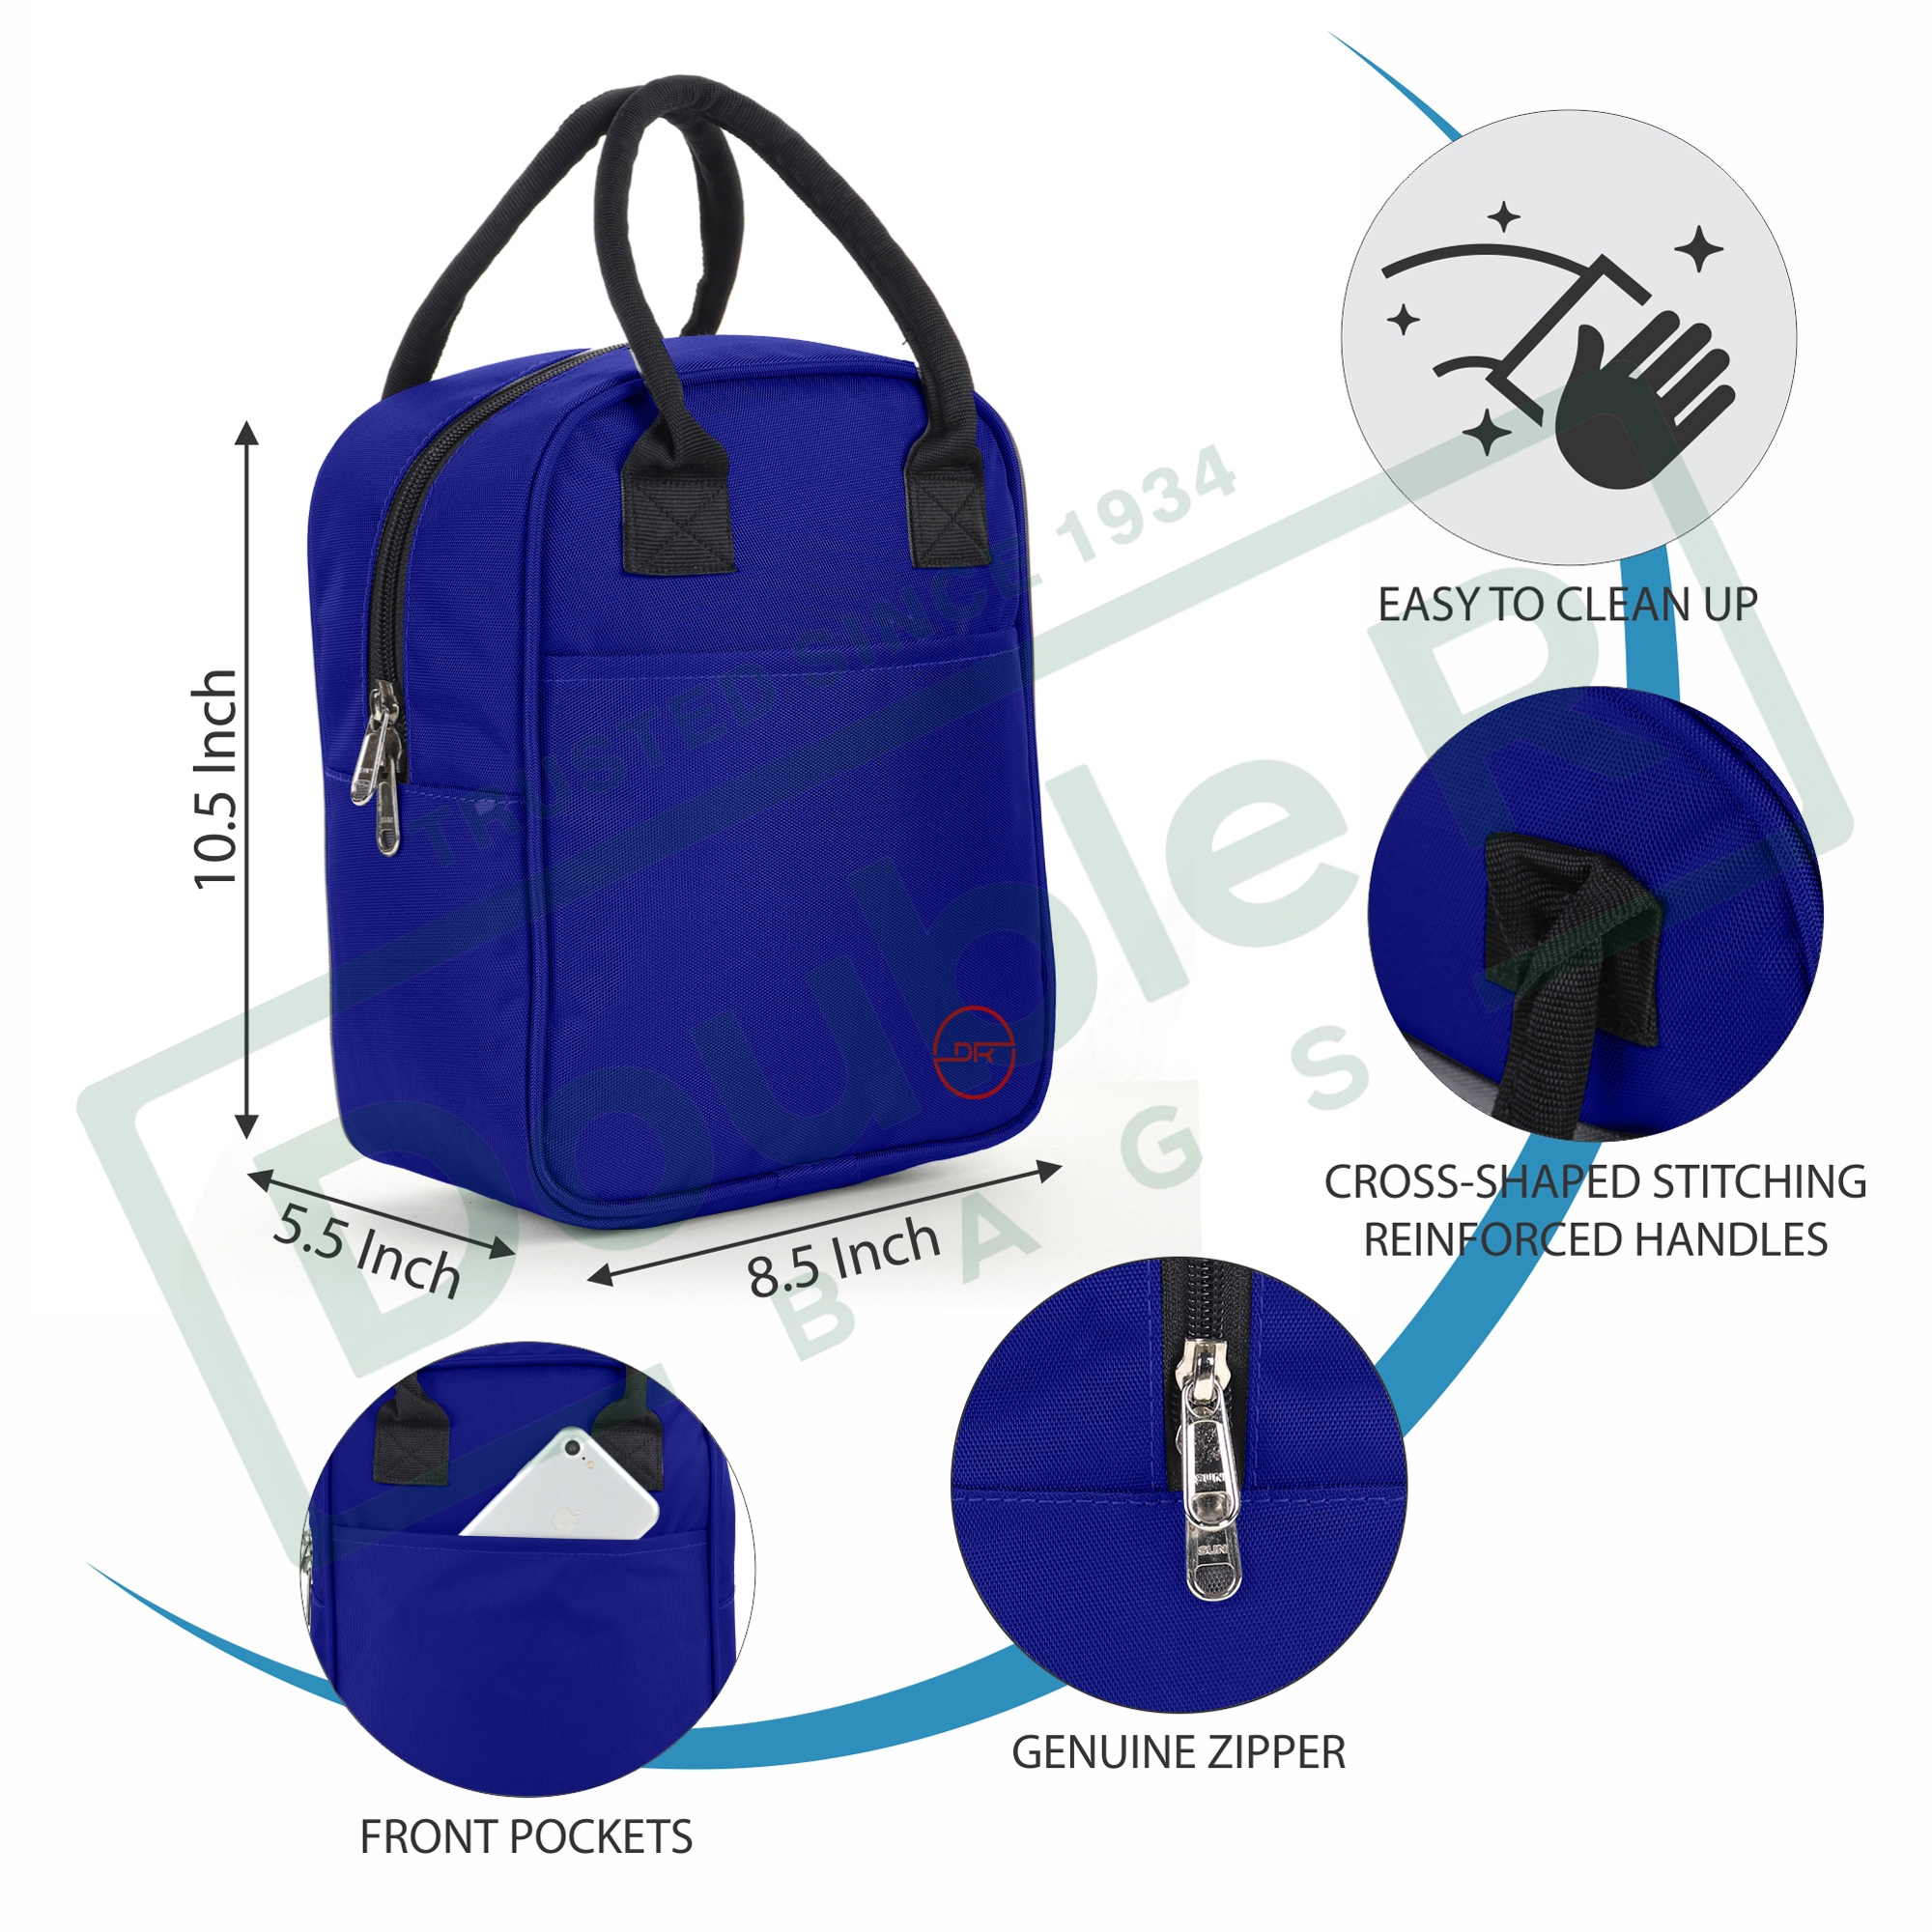 Double R Bags Insulated Lunch Bag for Office Men, Women and Kids, Tiffin Bags for School, Picnic, Work, Carry Bag for Lunch Box (Royal Blue)